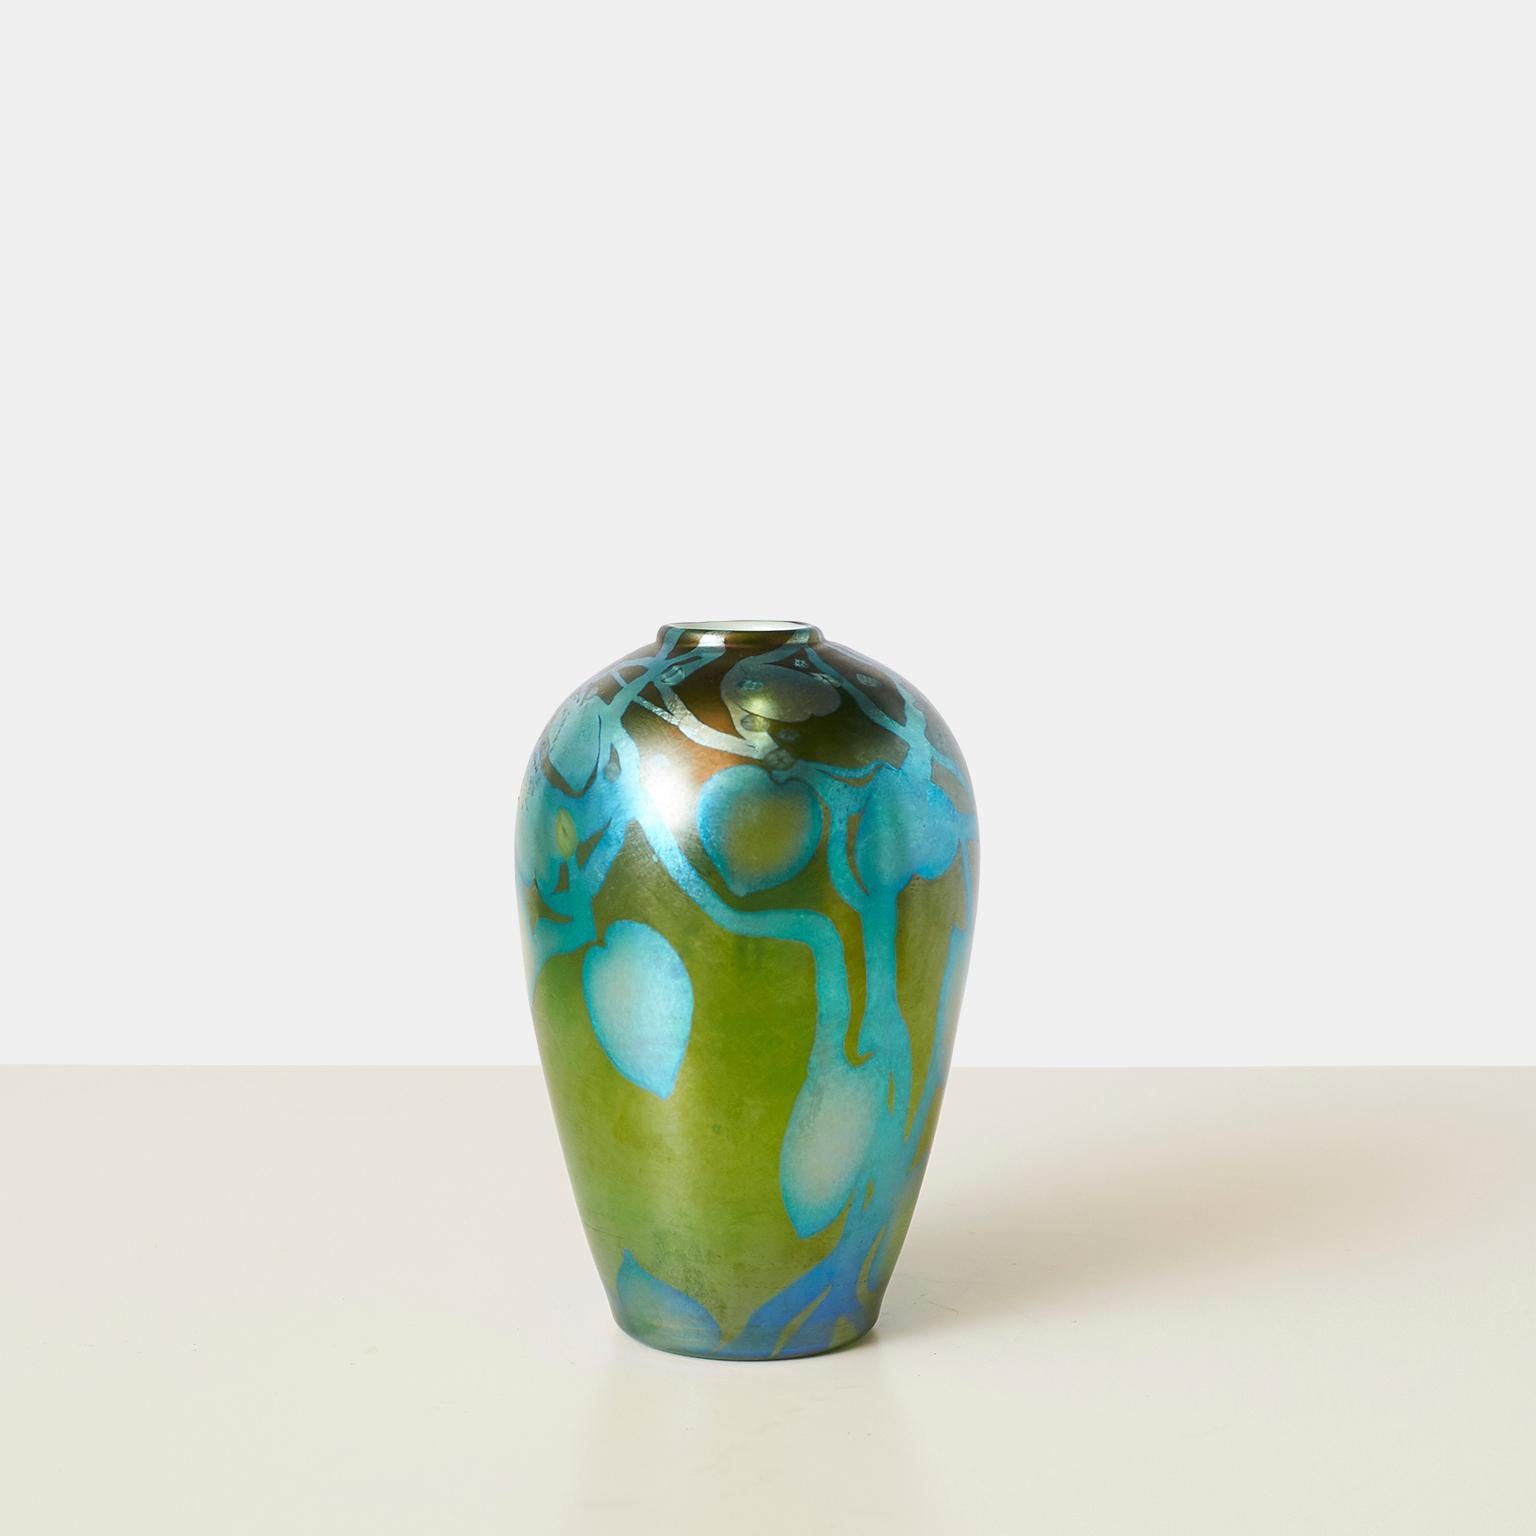 An petite opalescent ovoid favrile glass vase in hues of greens and blues by Louis Comfort Tiffany. Etched J C T and numbered on the base.

No chips, cracks or repairs.